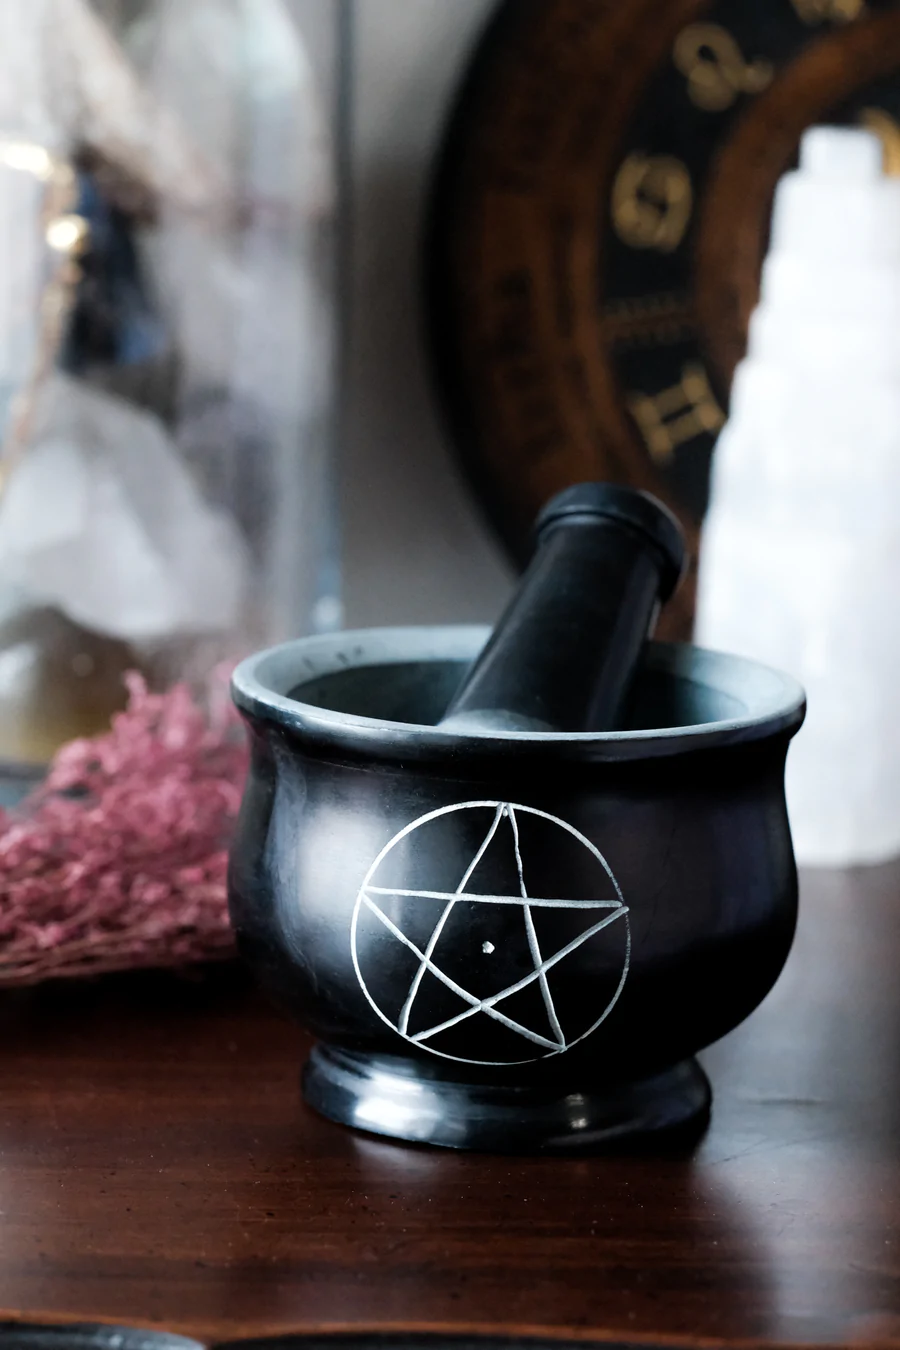 A classic witchy gift, a mortar and pestle is used for grinding herbs in order to make recipes, teas, and incense blends.